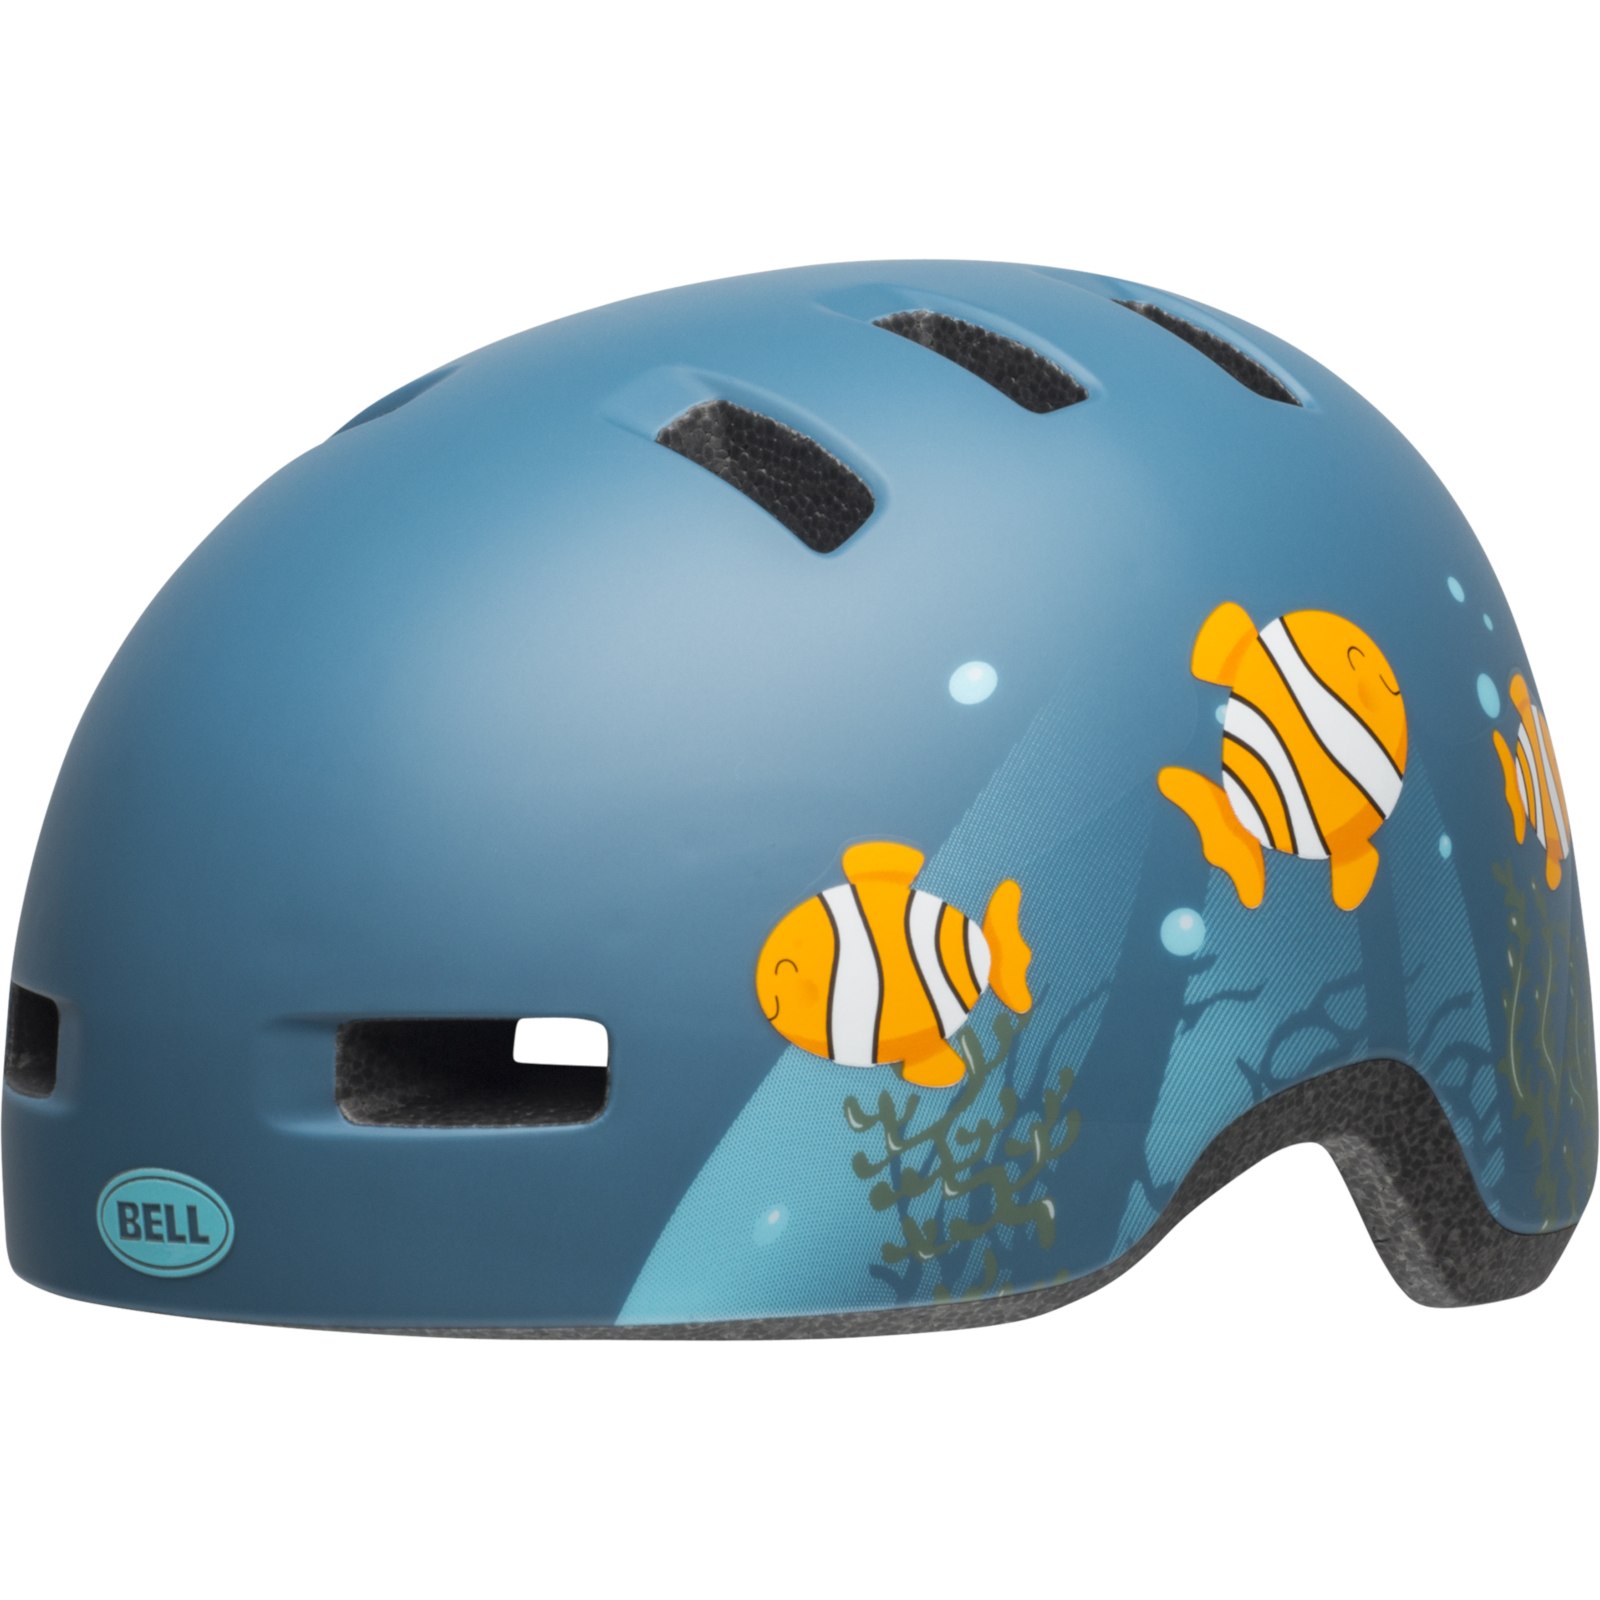 Picture of Bell Lil Ripper Child Helmet - matte gray/blue fish